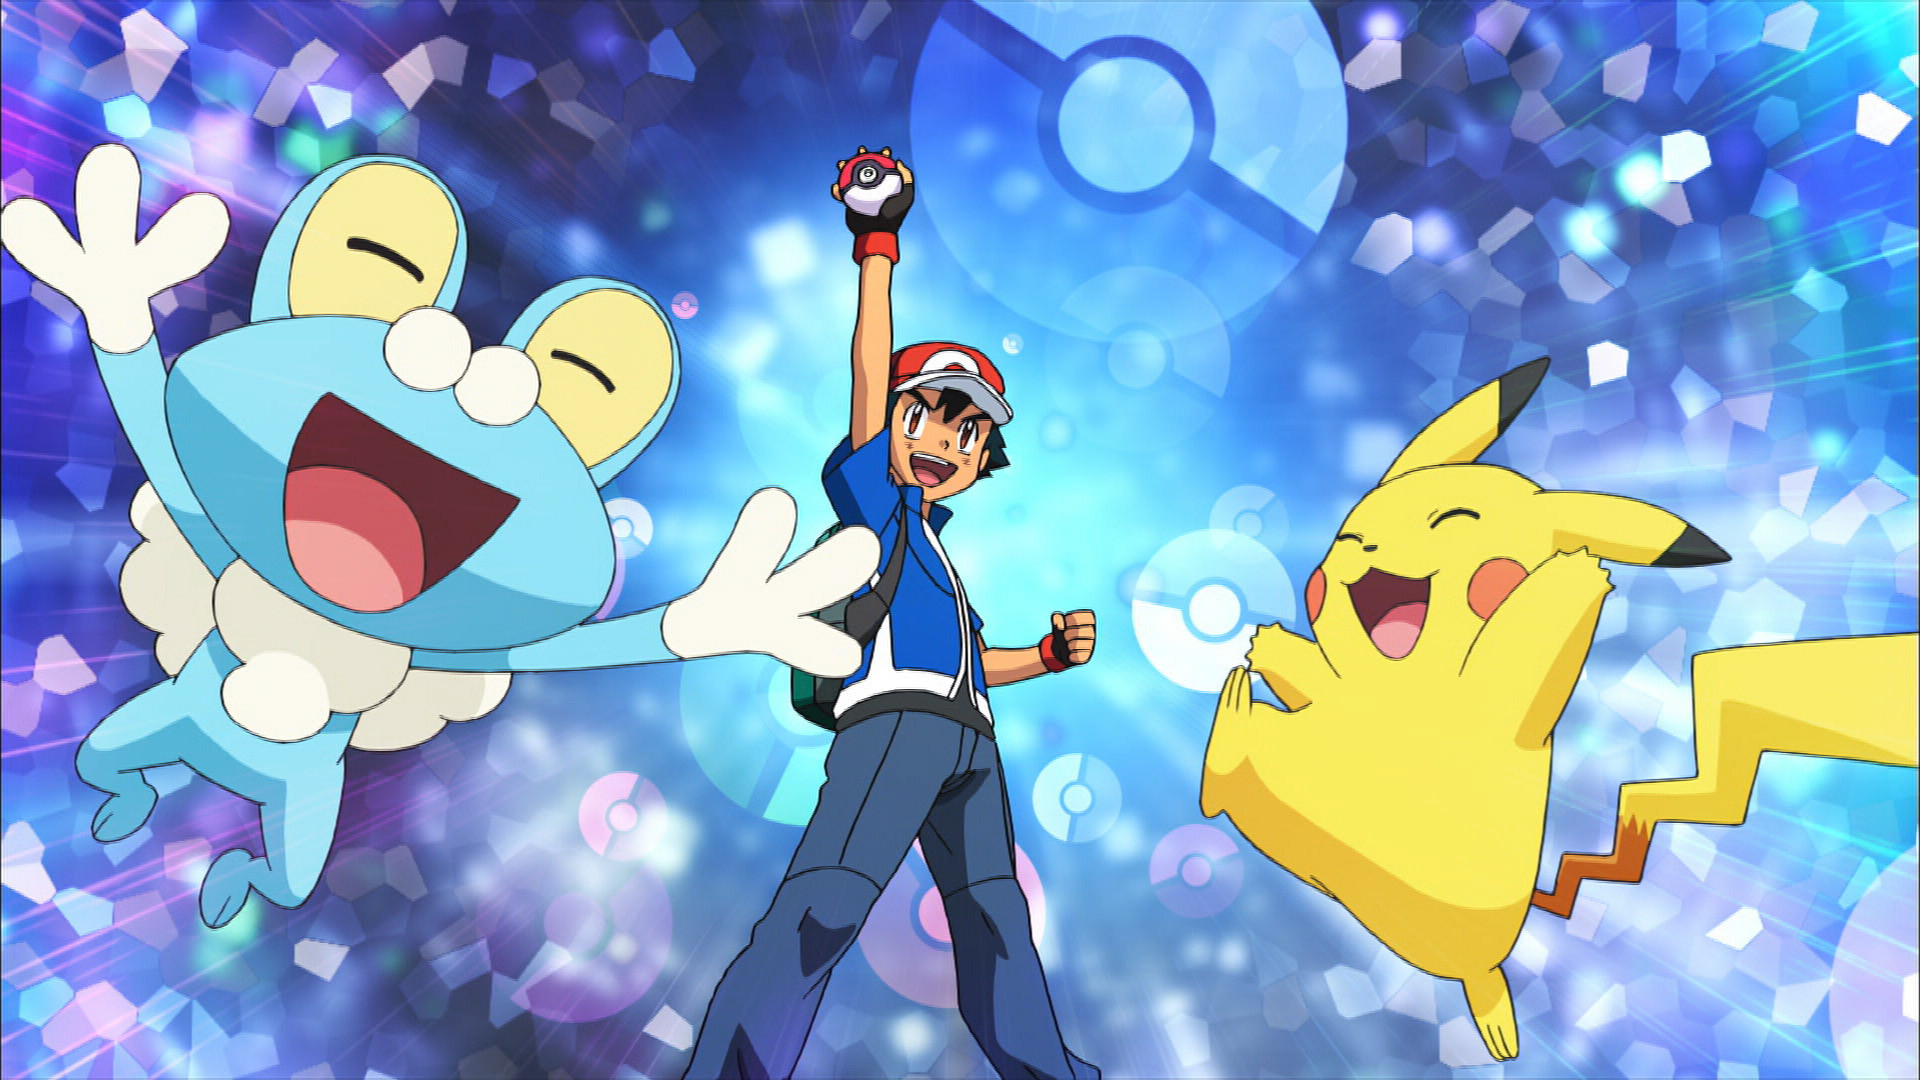 1920x1080 Pokemon HD Wallpaper Wide ready to download just for FREE from our  beautiful Pokemon HD Wallpapers